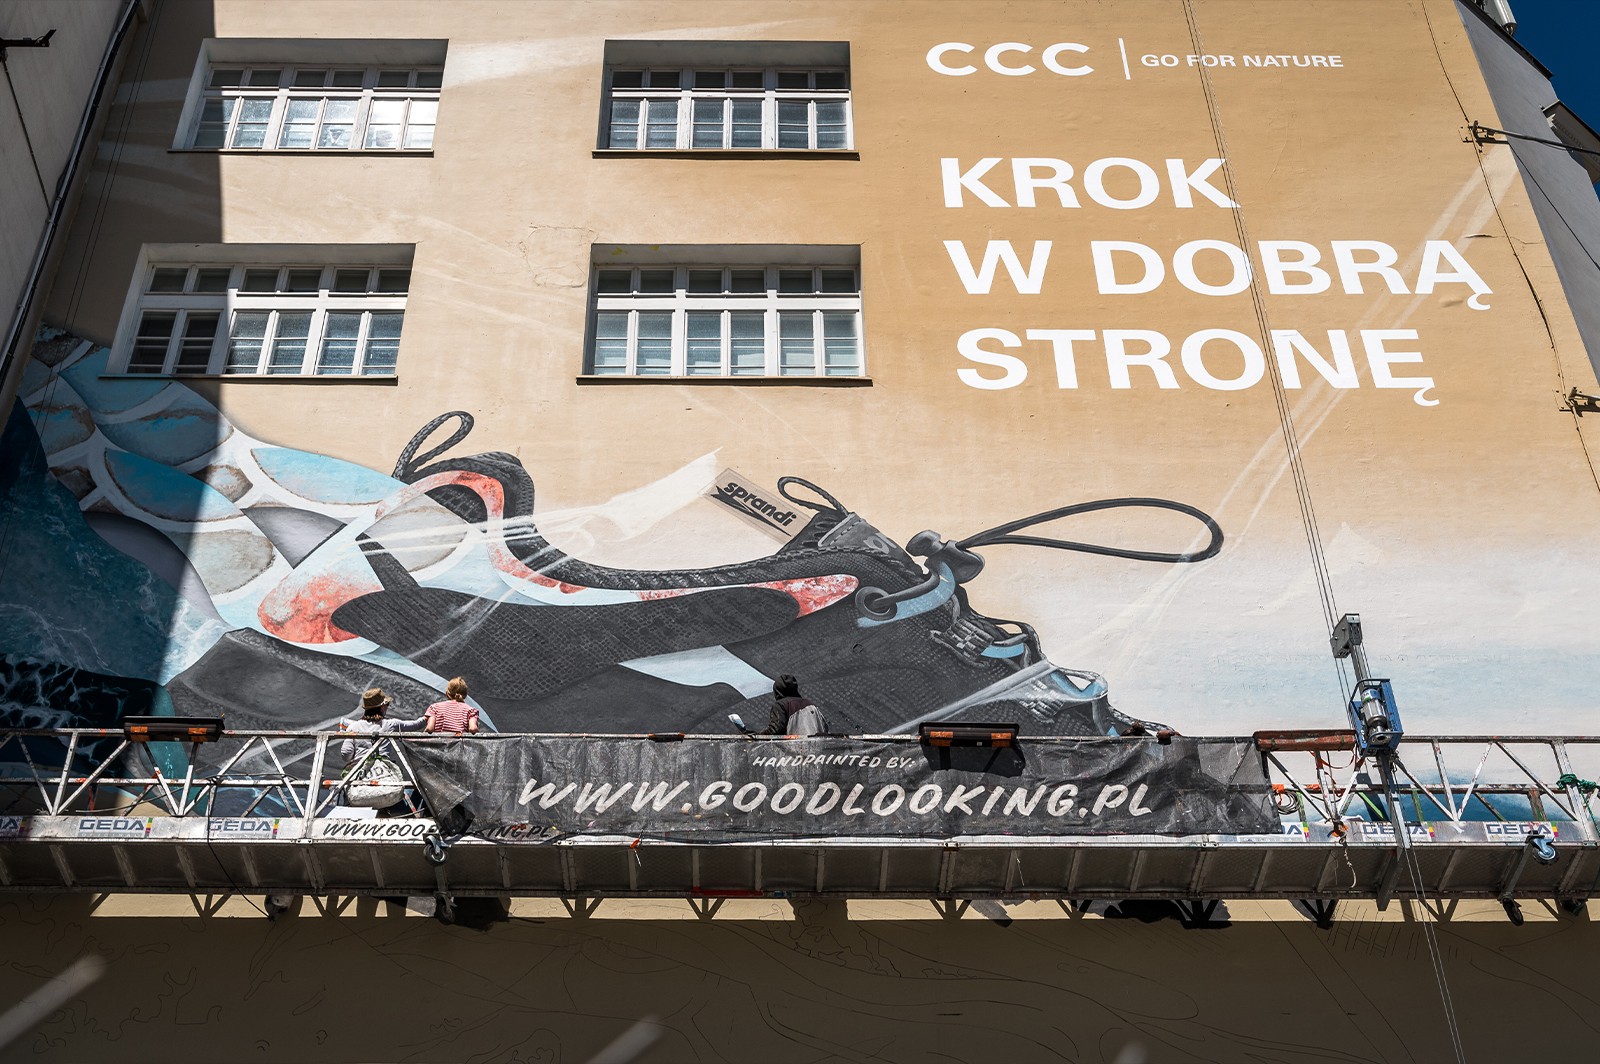 Advertising CCC mural at the city center in Warsaw | LET'S CARE | Portfolio